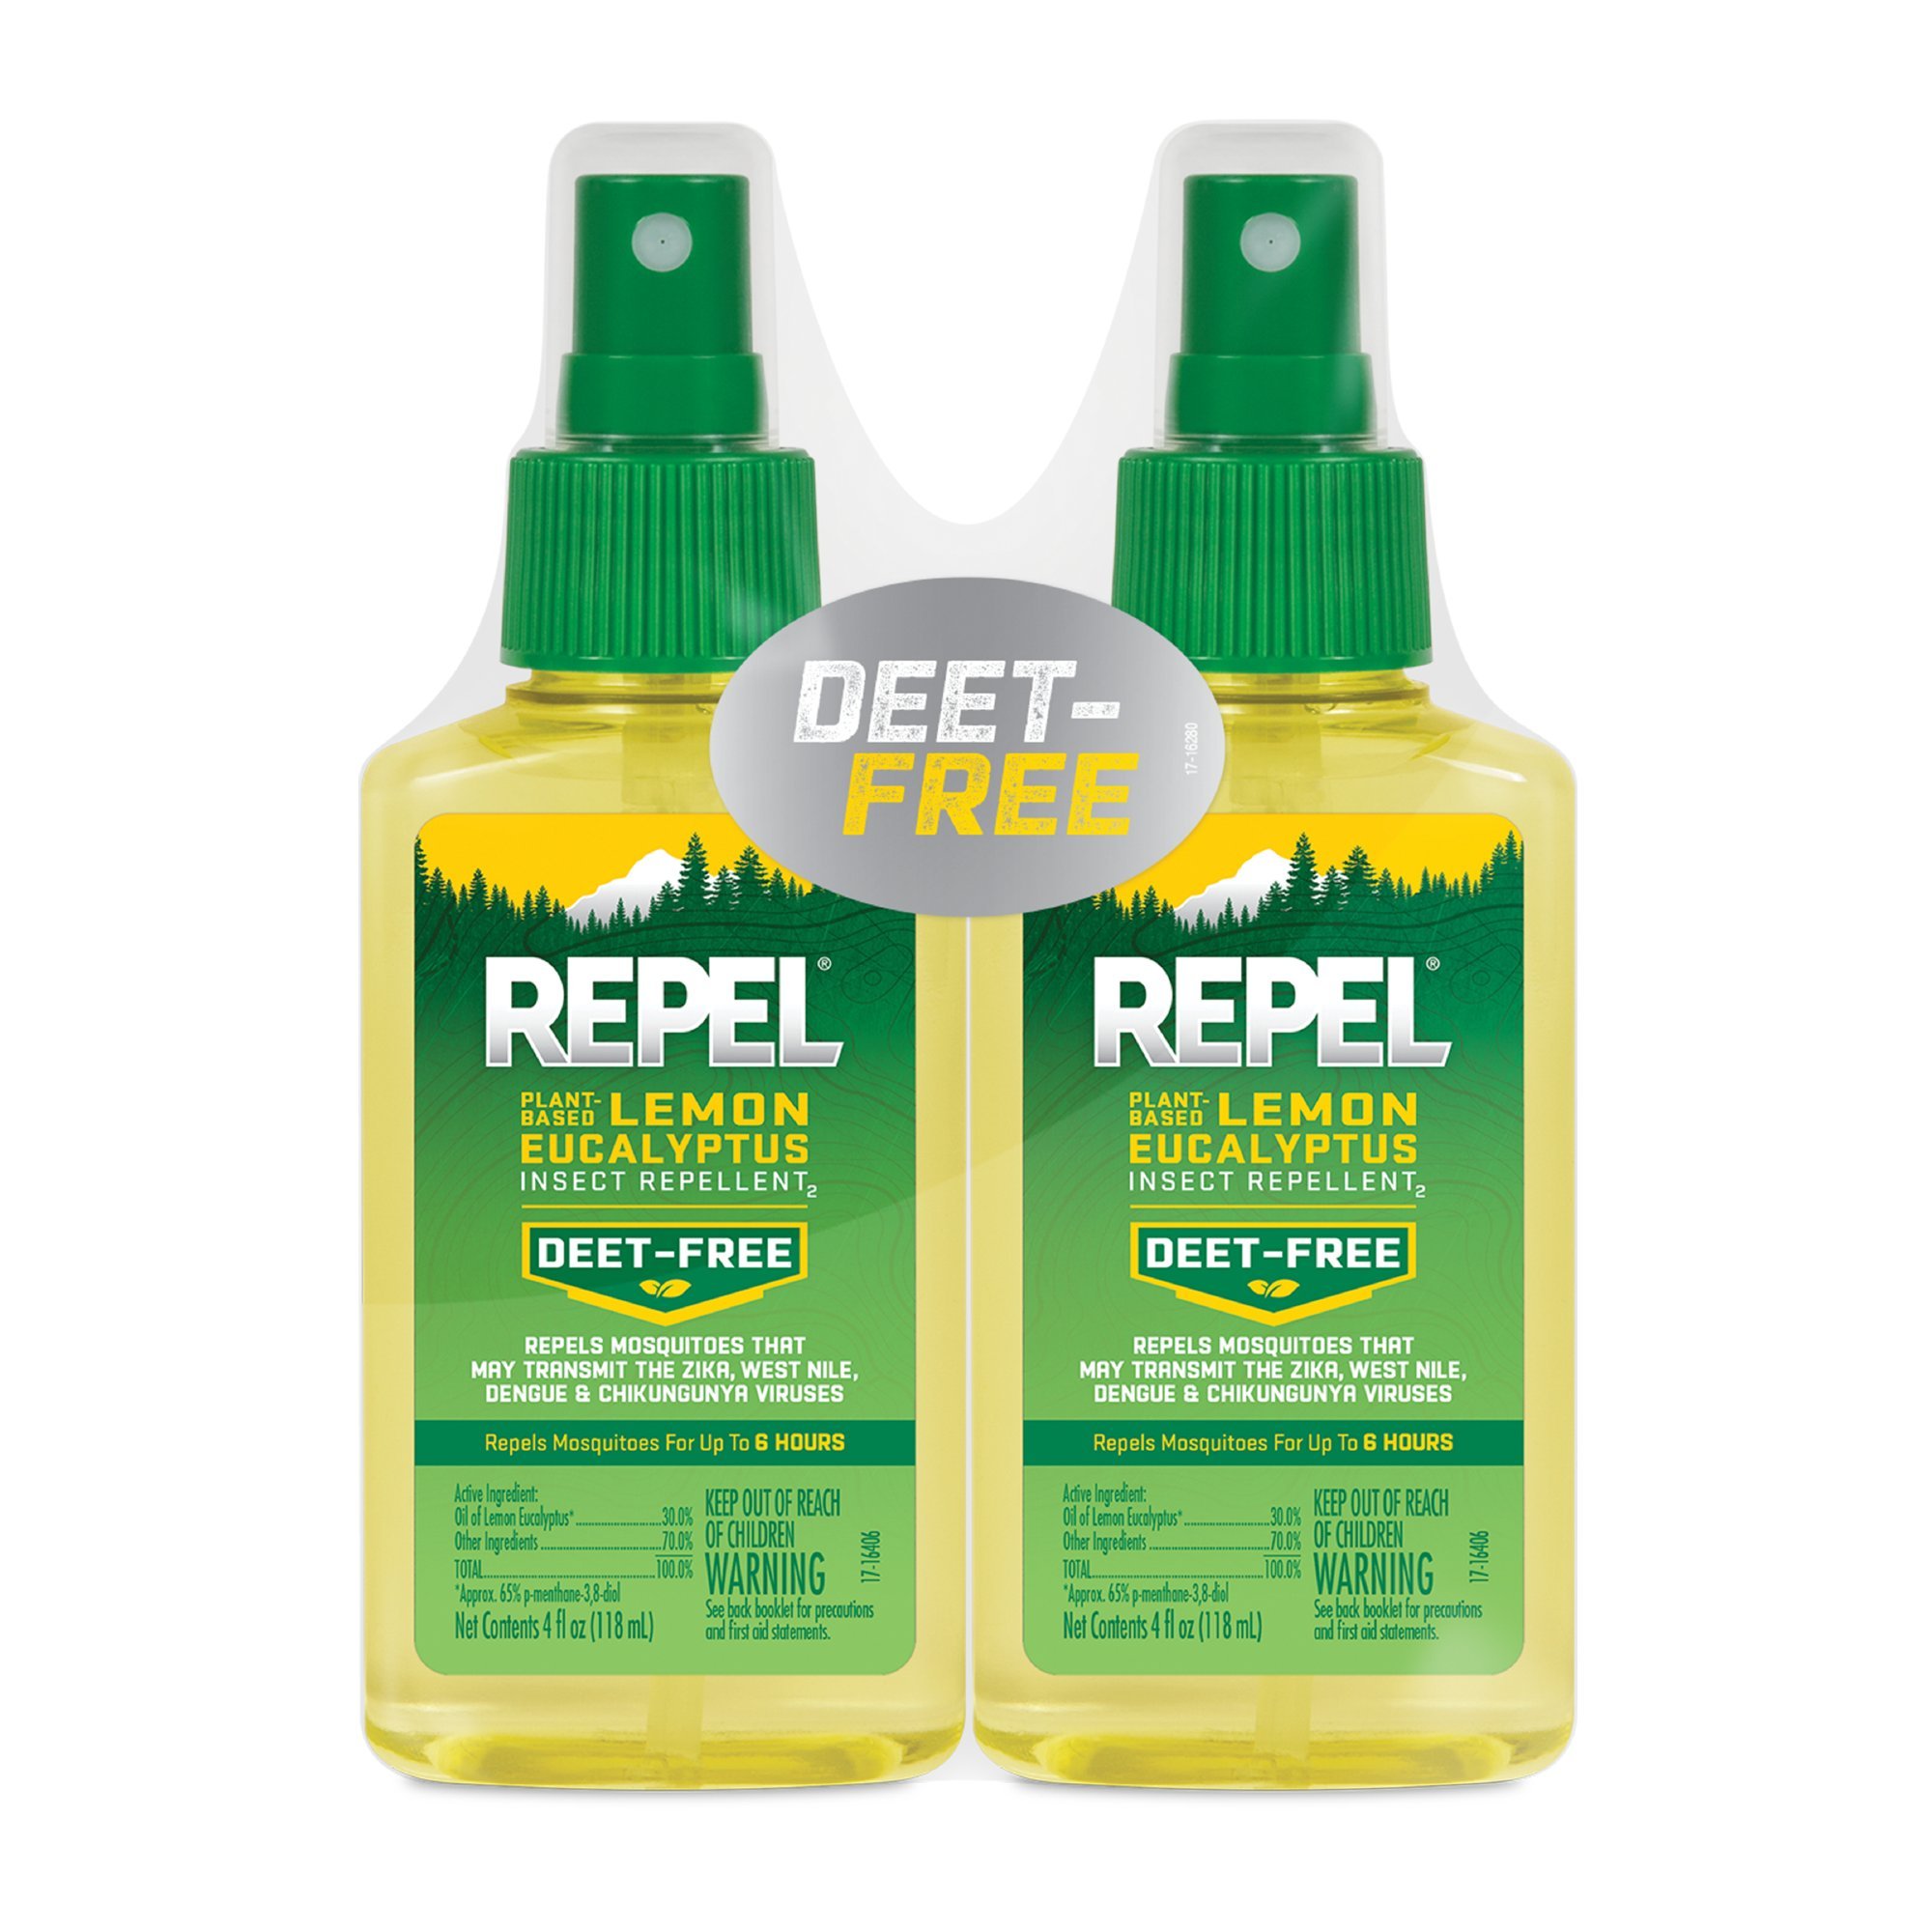 2-Pack 4-Ounce Repel Plant-Based Lemon Eucalyptus Insect Mosquito Repellent Spray $9.08 ($4.54 Each) + Free Shipping w/ Prime or on $35+